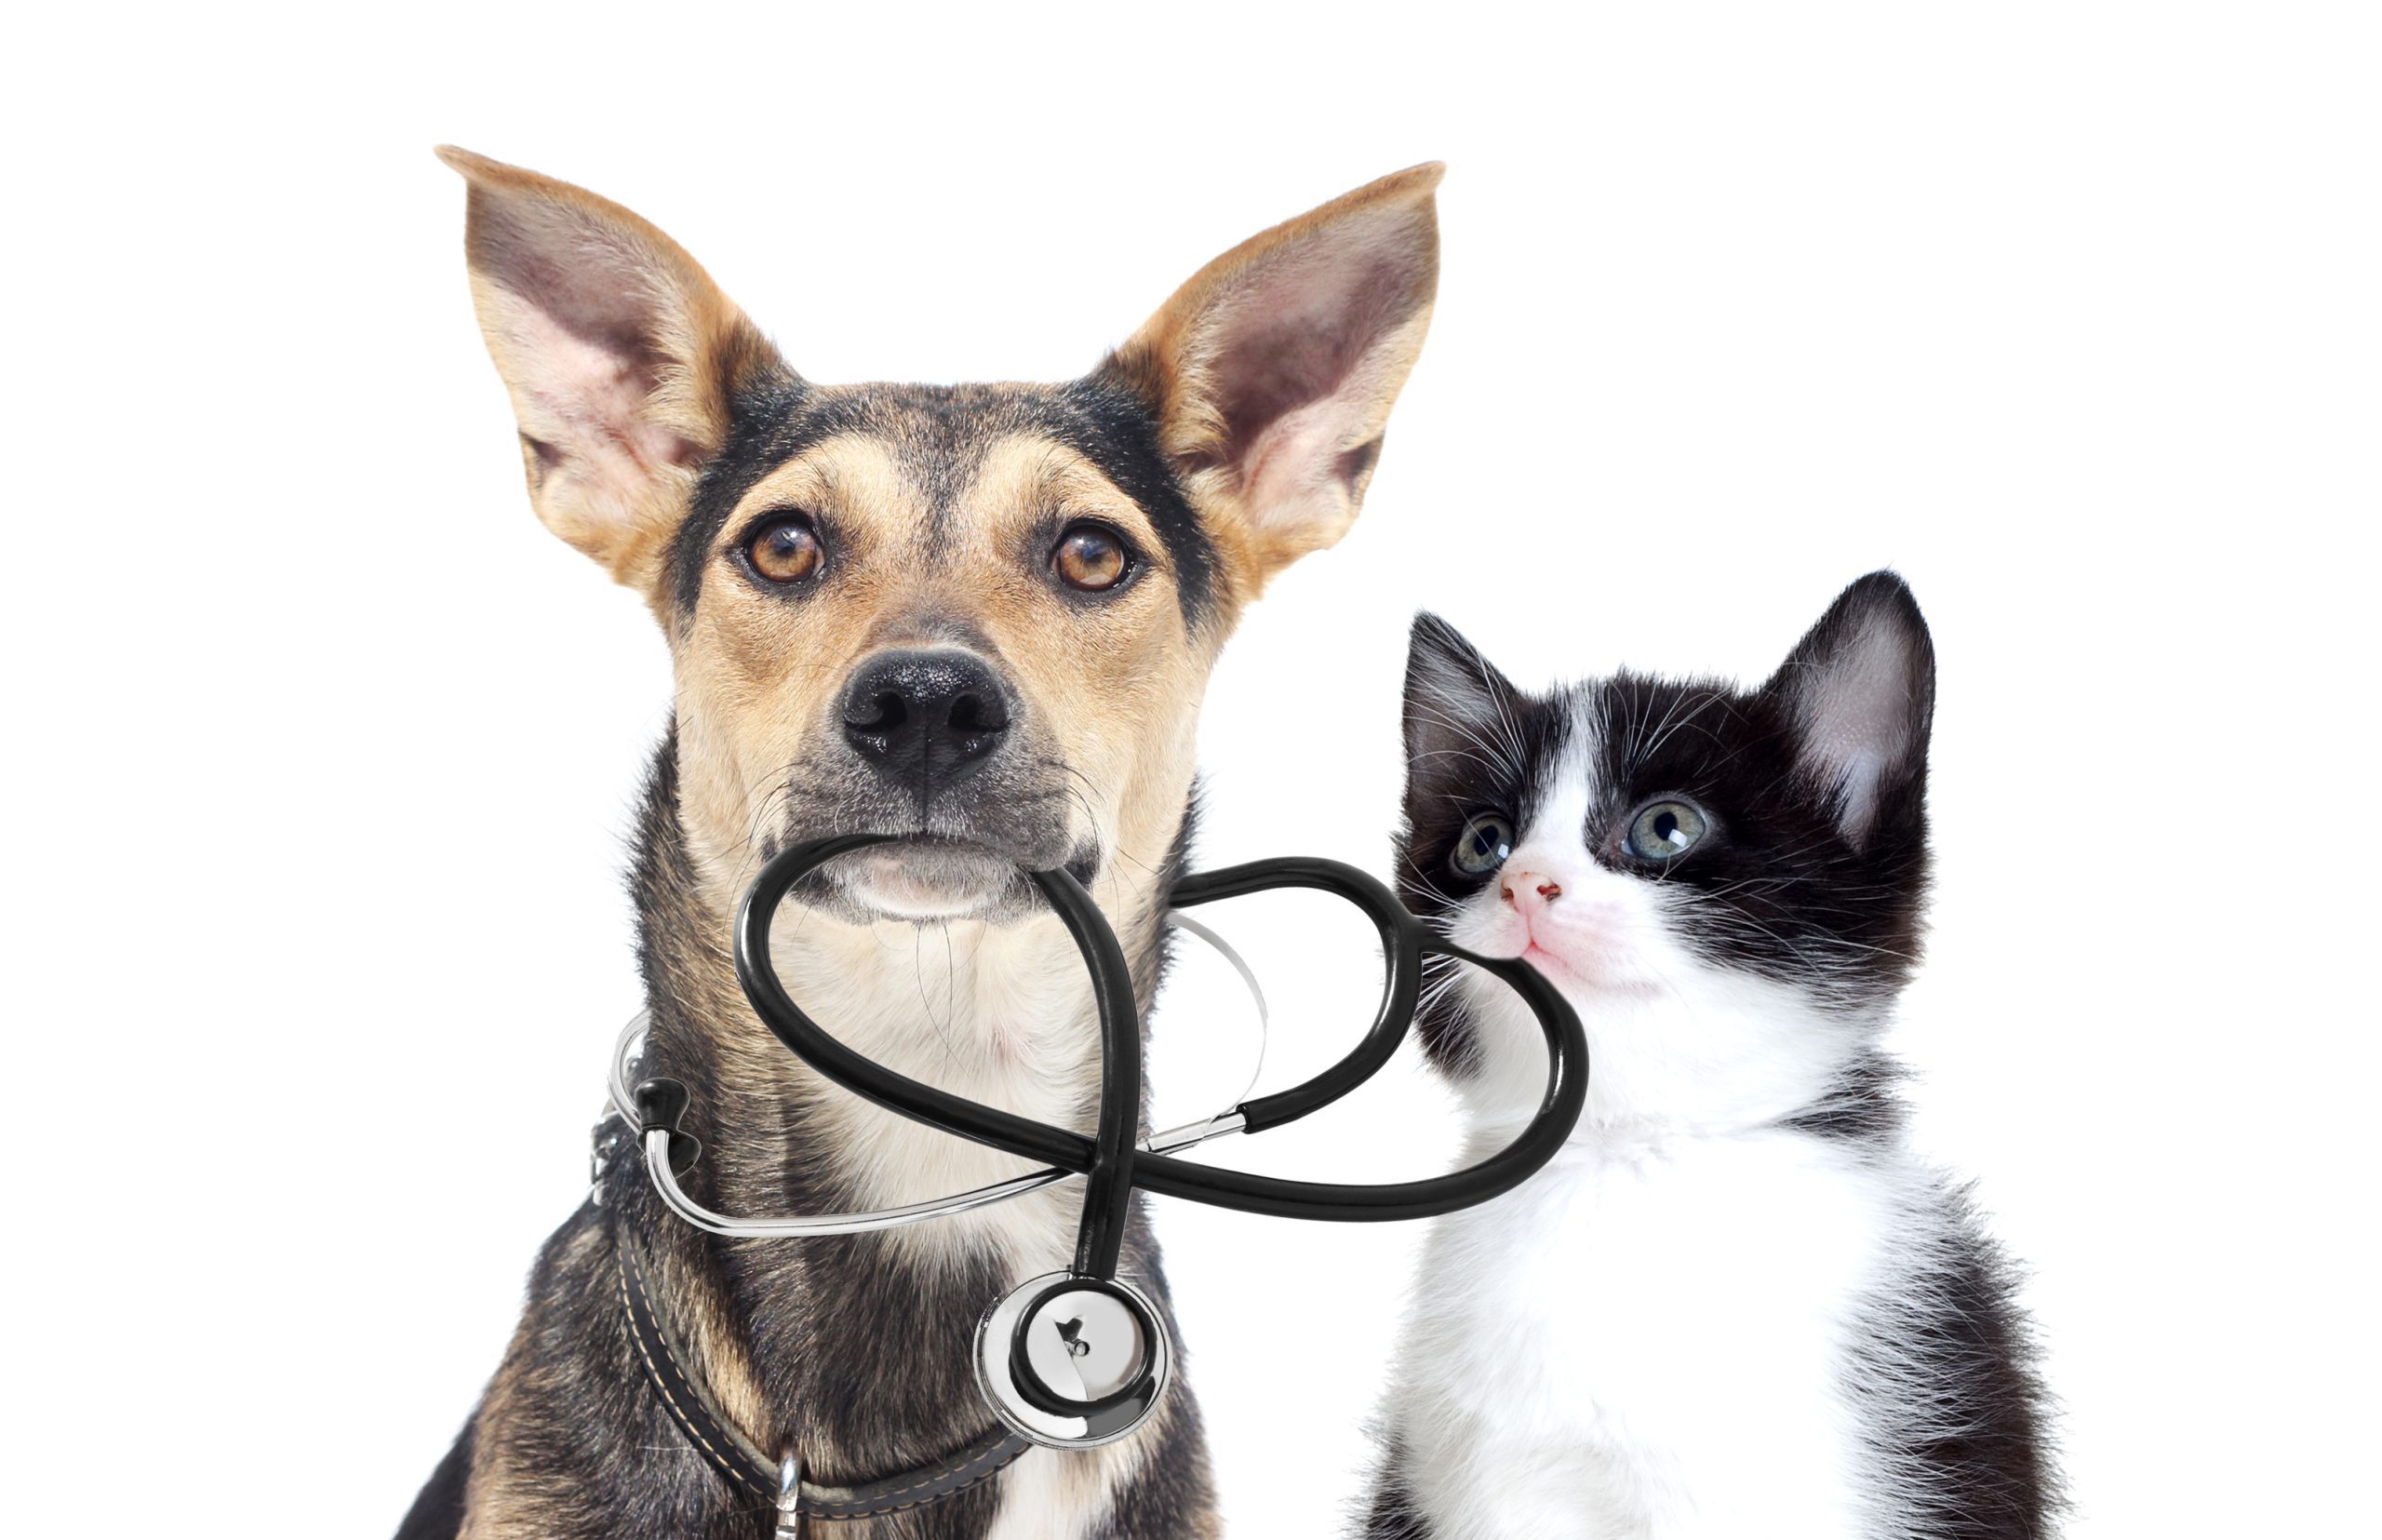 A dog and a cat with a stethoscope